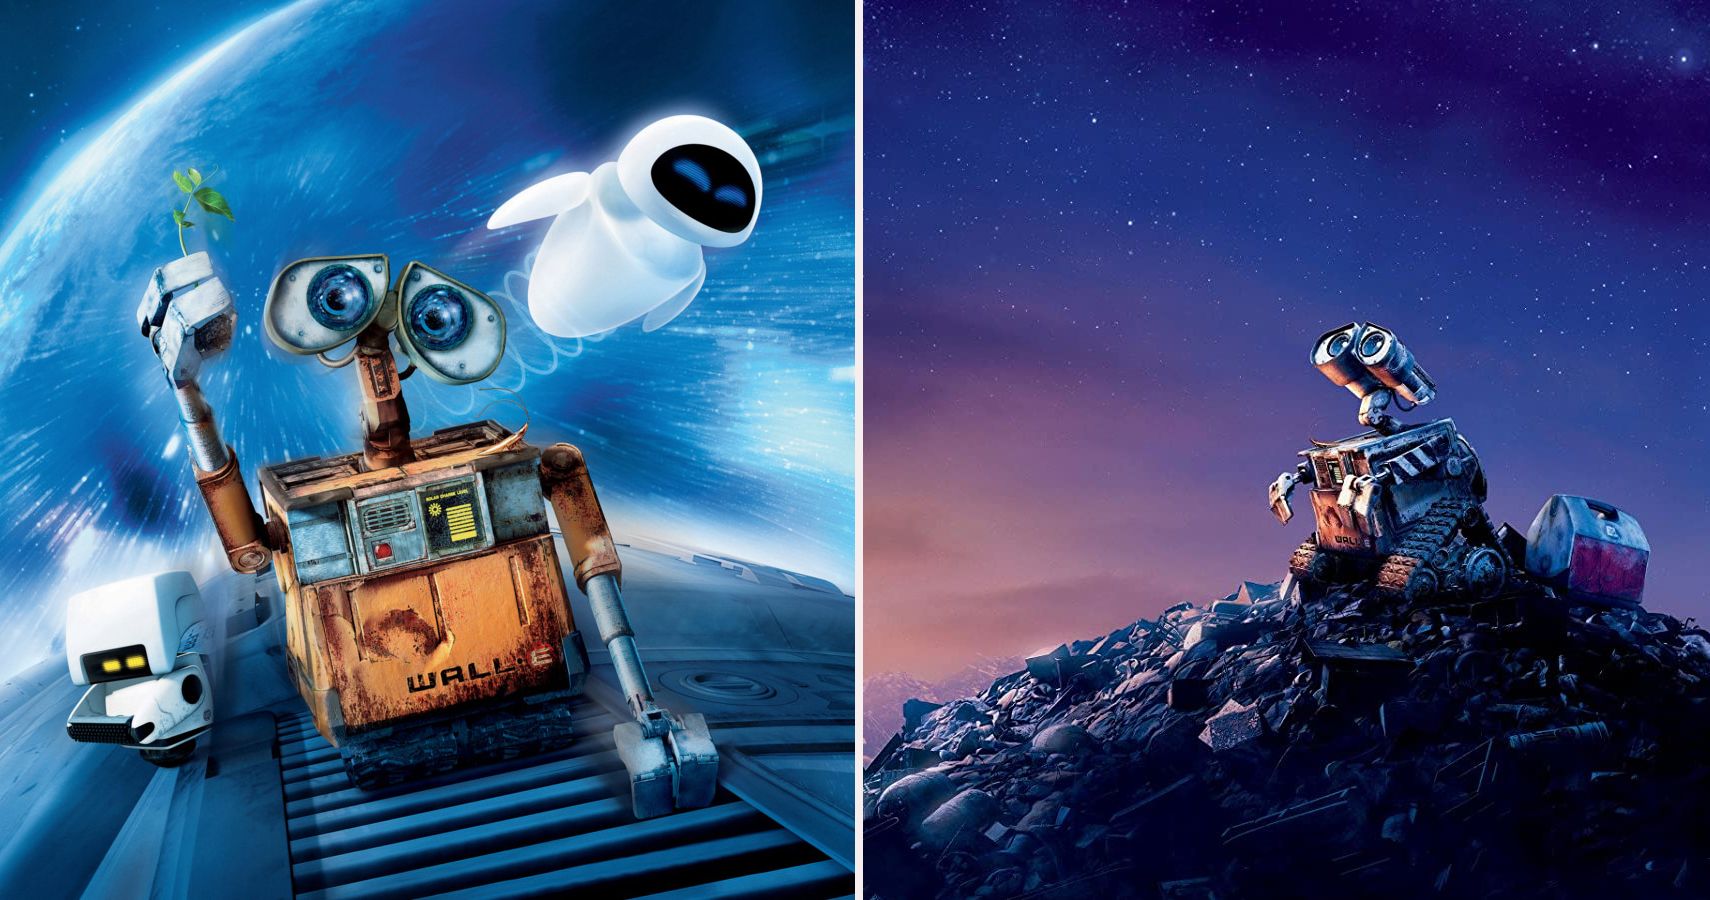 Disney Every Wall E Poster Ranked Cbr